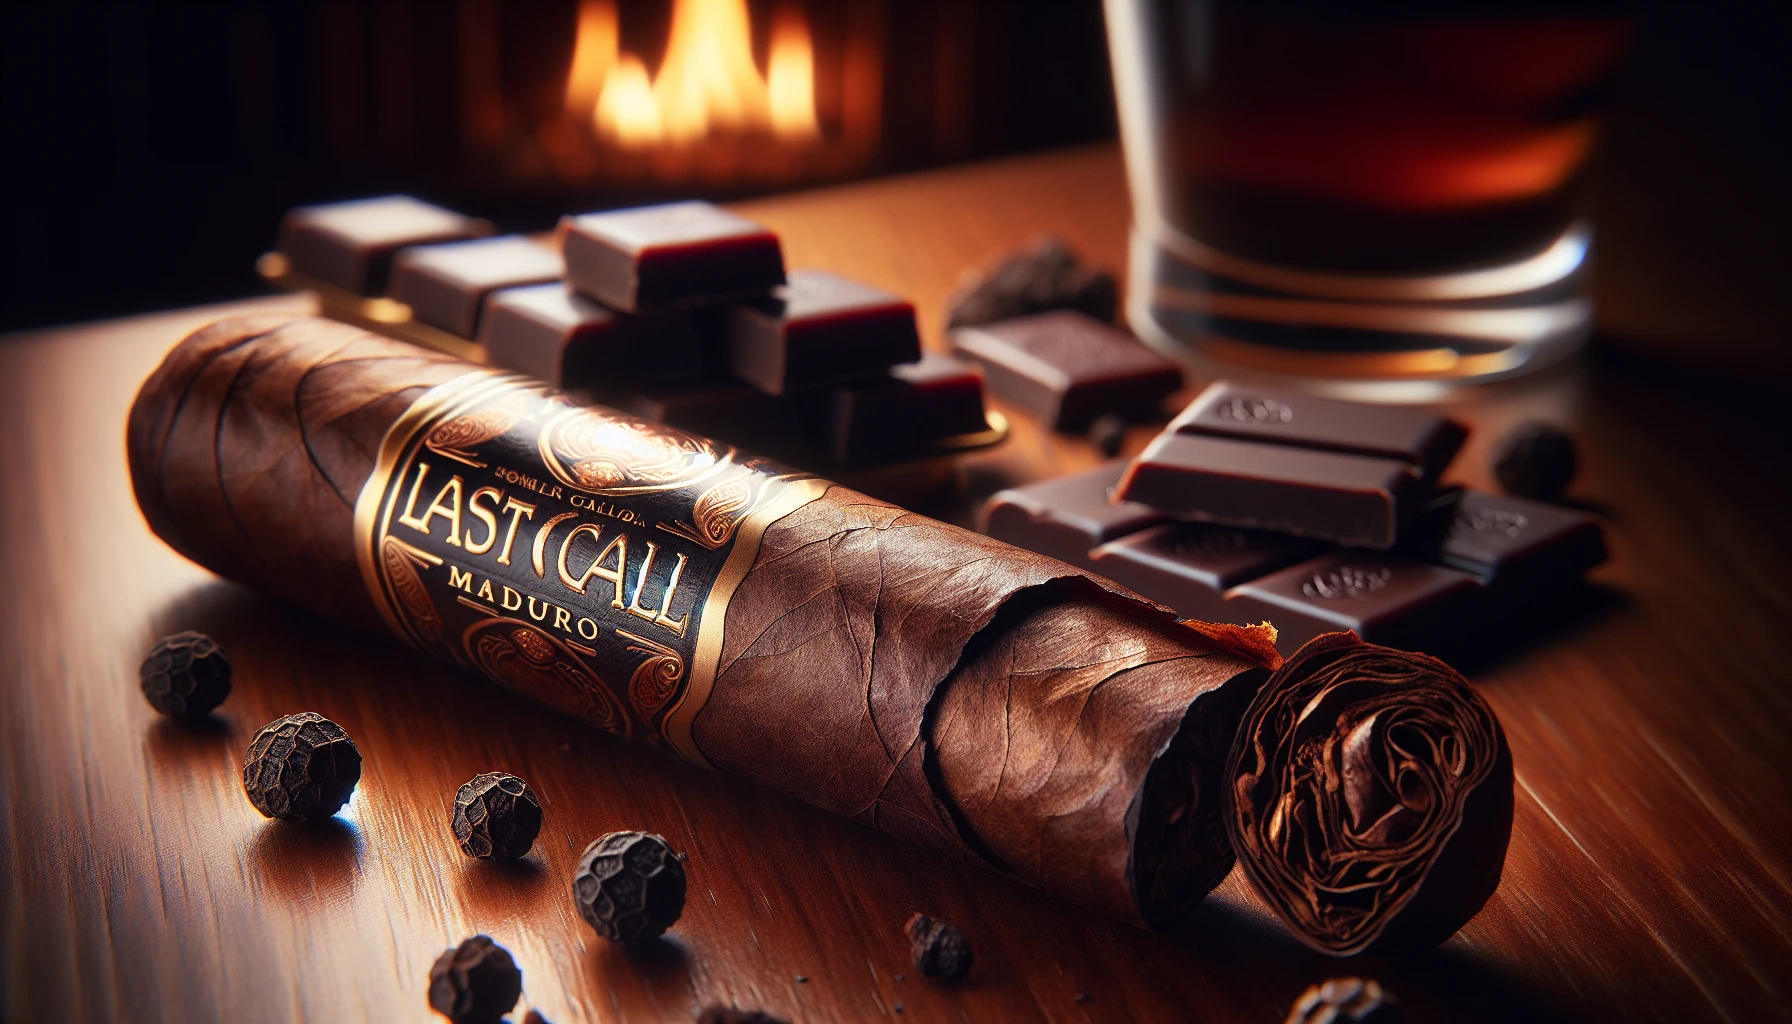 A rich and flavorful Last Call Maduro cigar